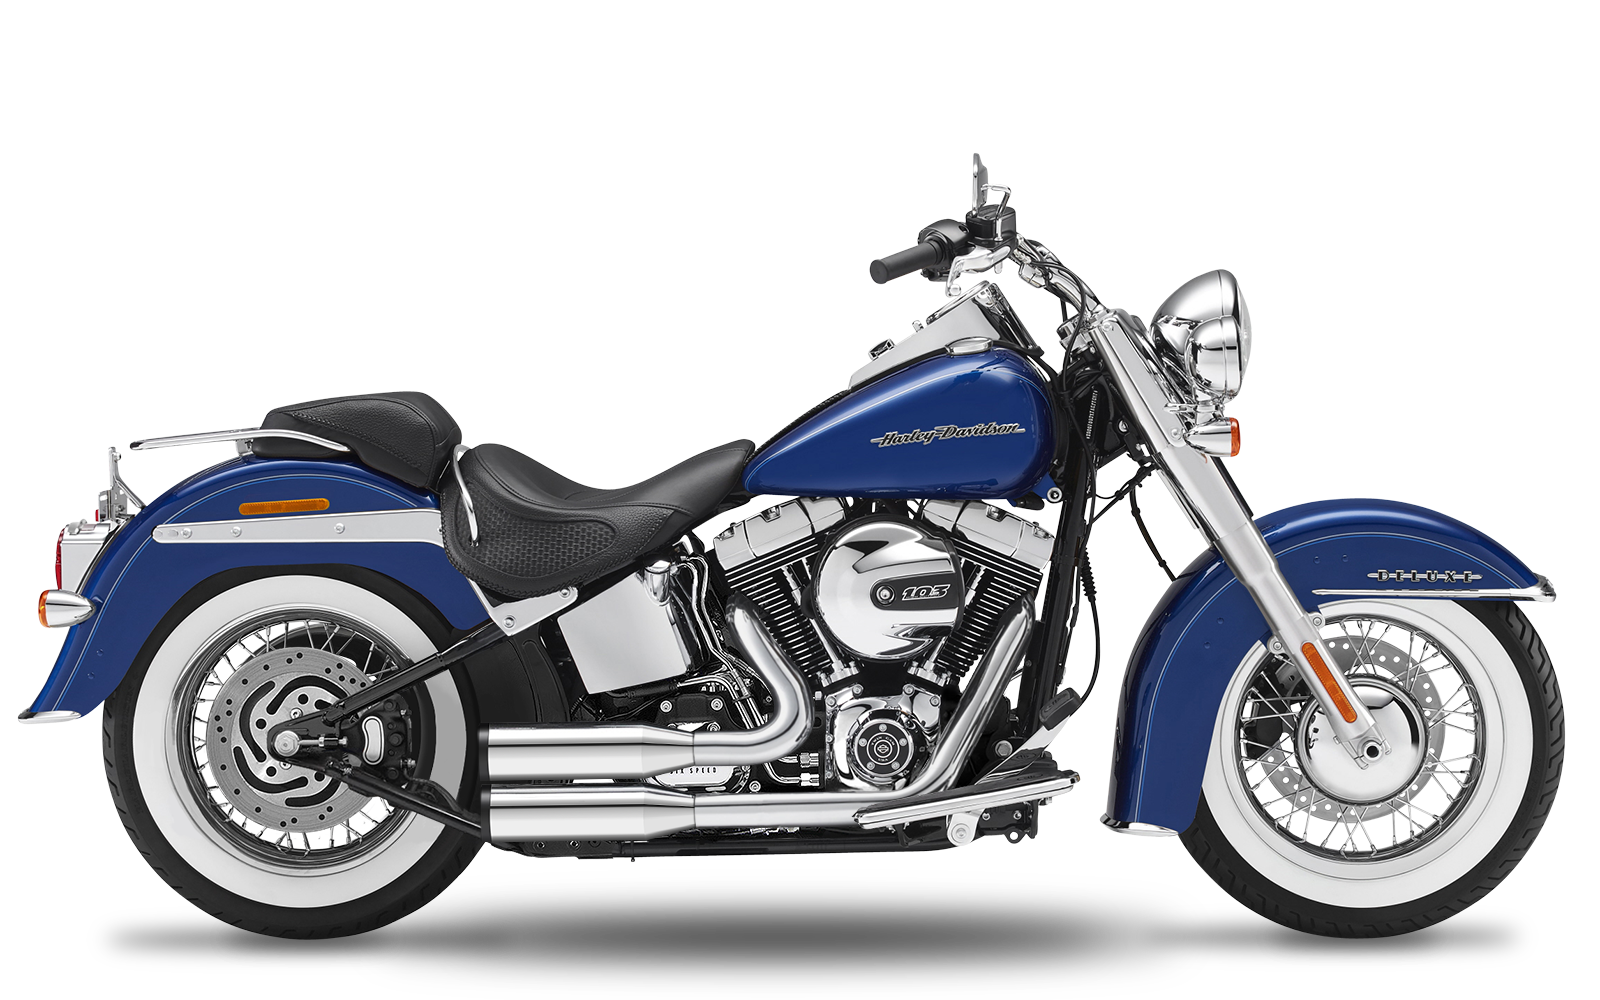 CRUISER/SOFTAIL - Deluxe - TC88 - 2000-2006 - Complete systems adjustable